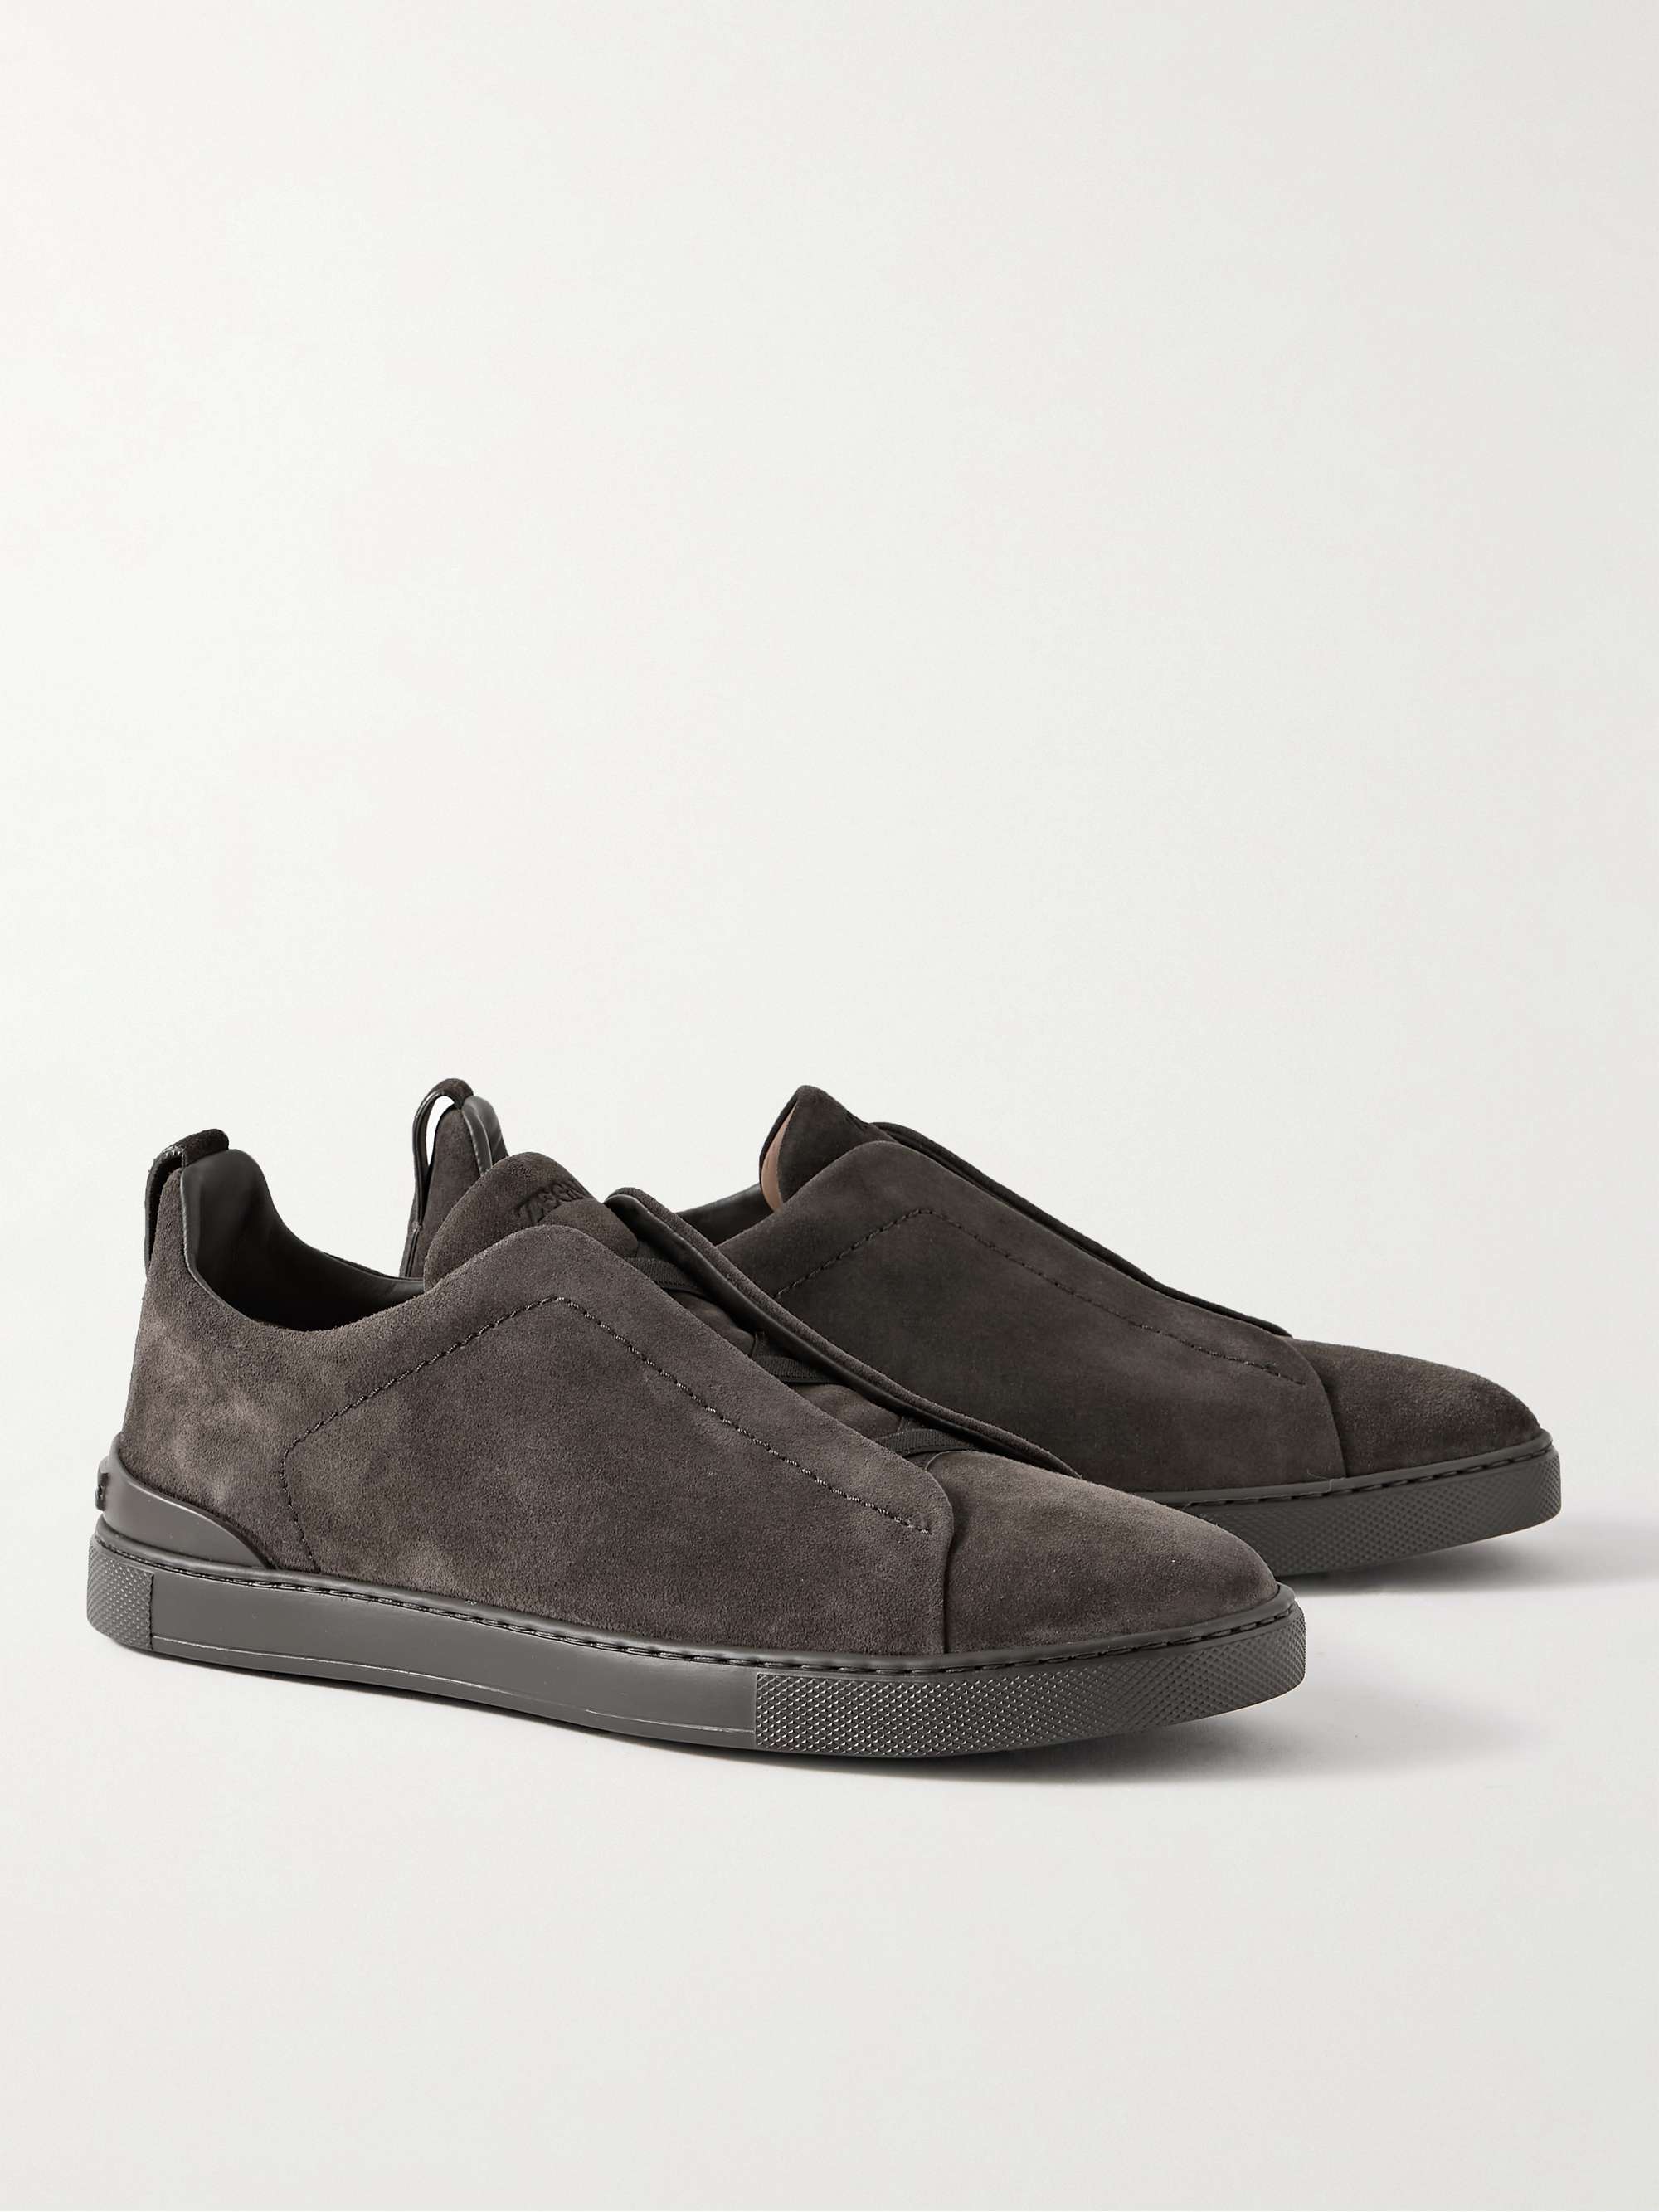 ZEGNA Triple Stitch Suede Sneakers